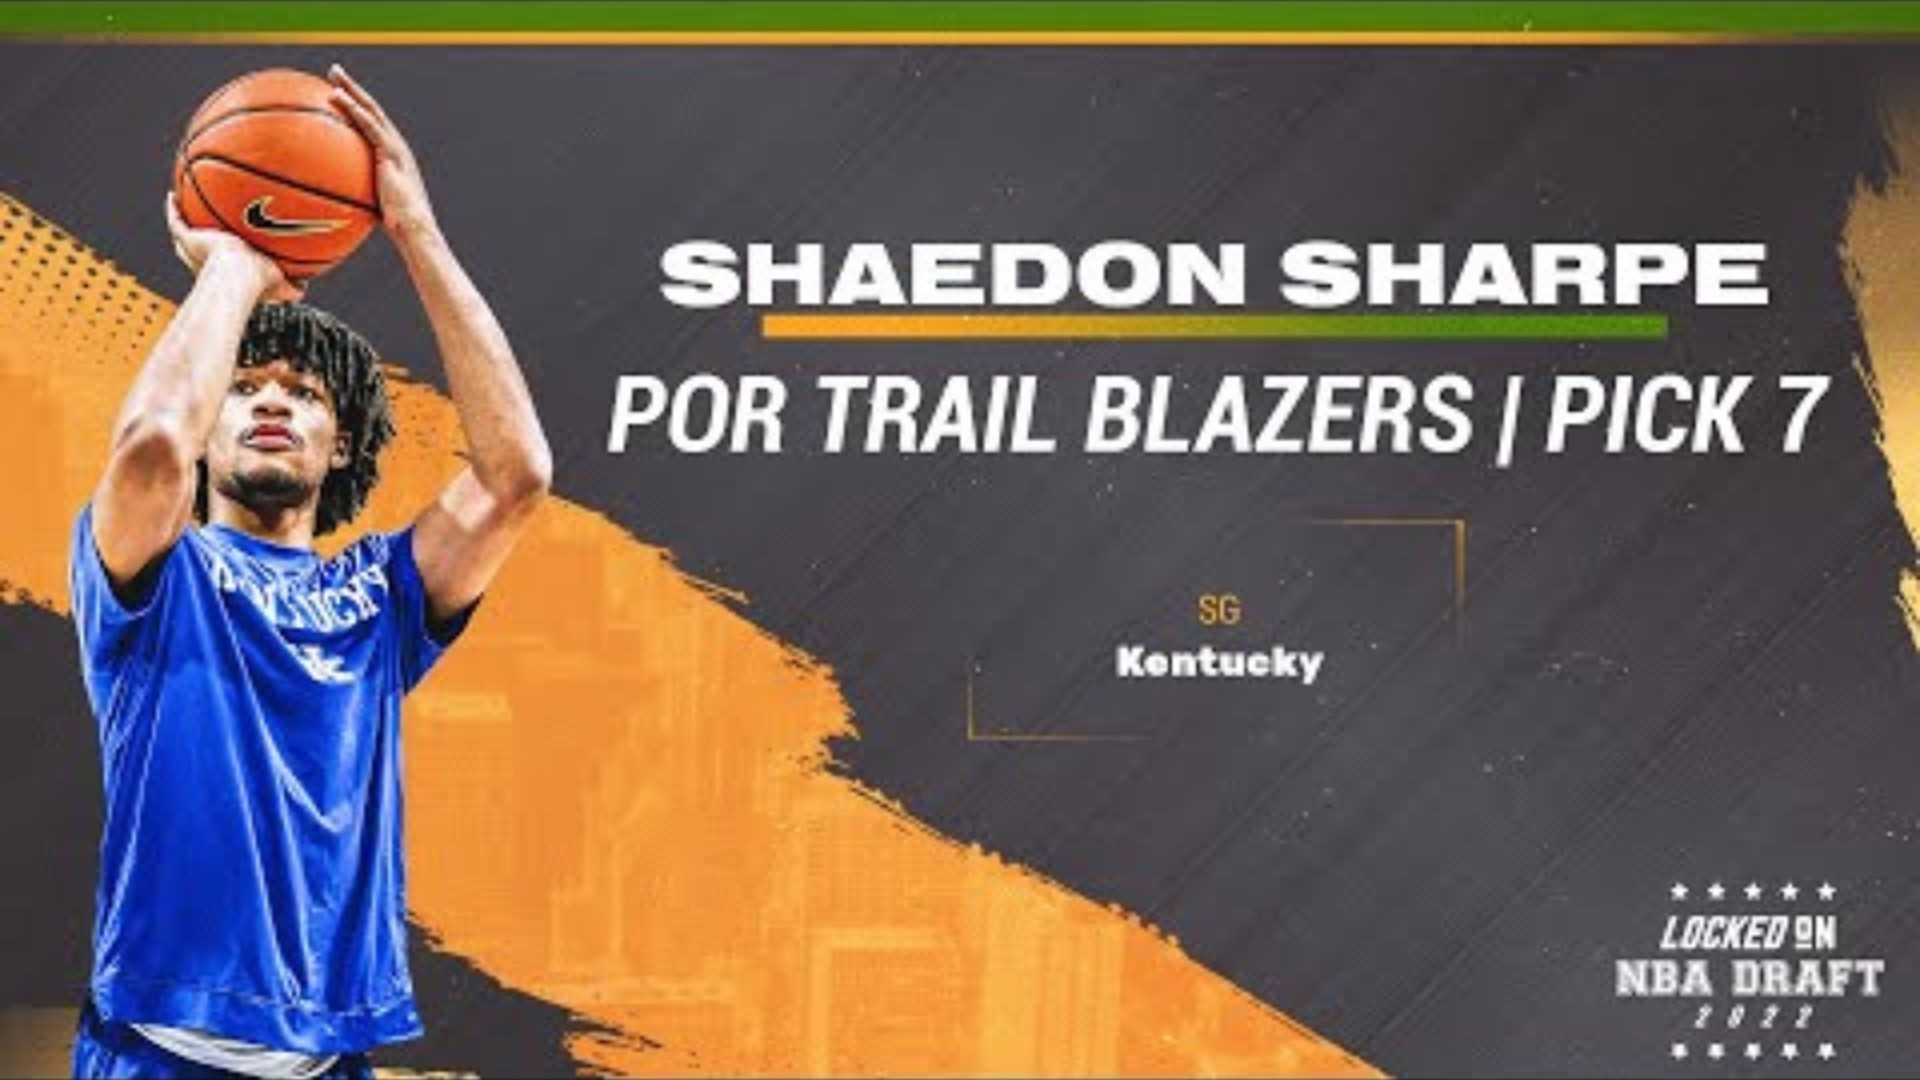 The Portland Trail Blazers selected Shaedon Sharpe with the seventh overall pick in the 2022 NBA Draft. Mike Richman discusses the selection.